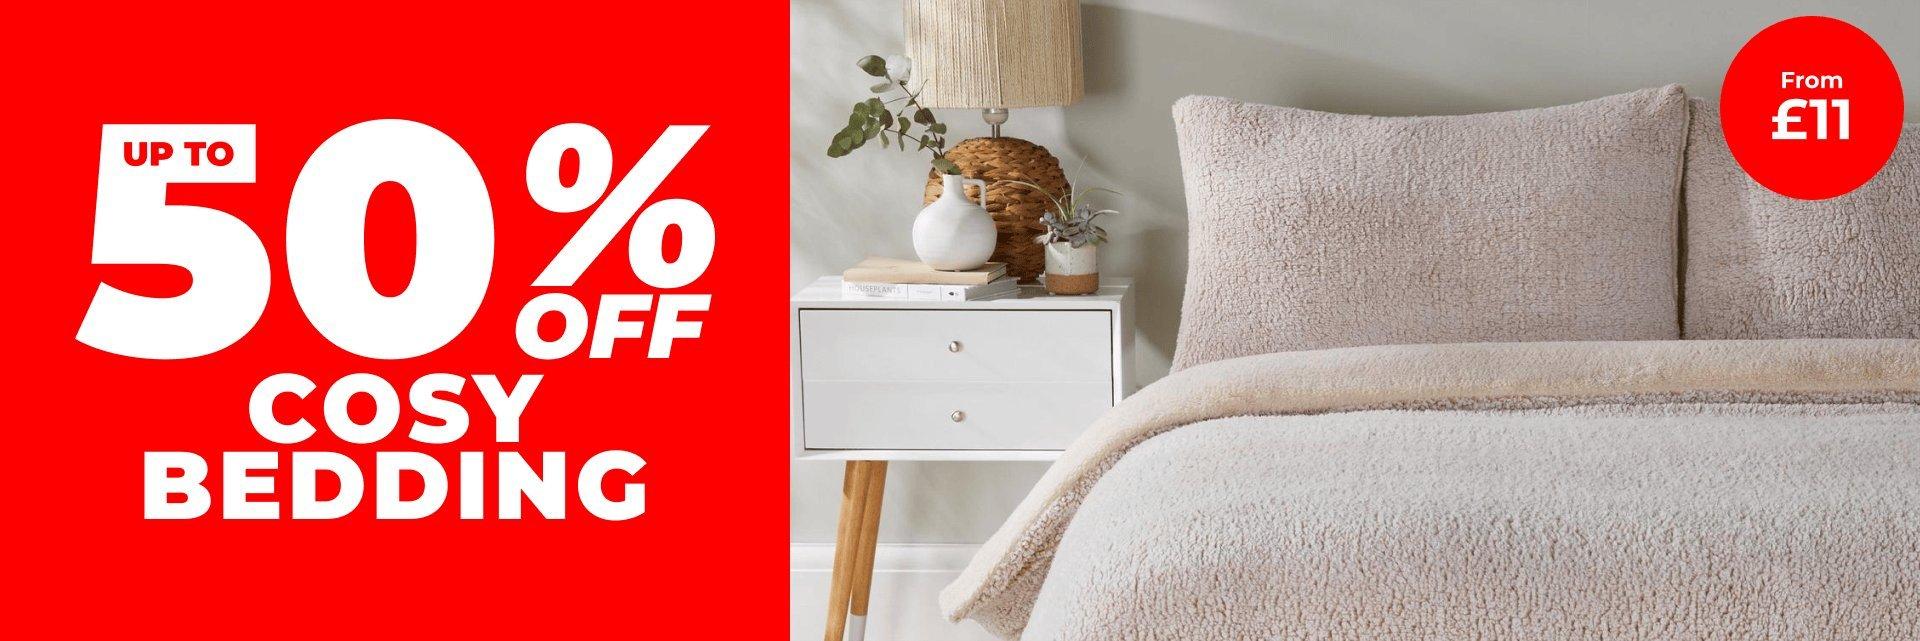 Up To 50% Off Cosy Bedding